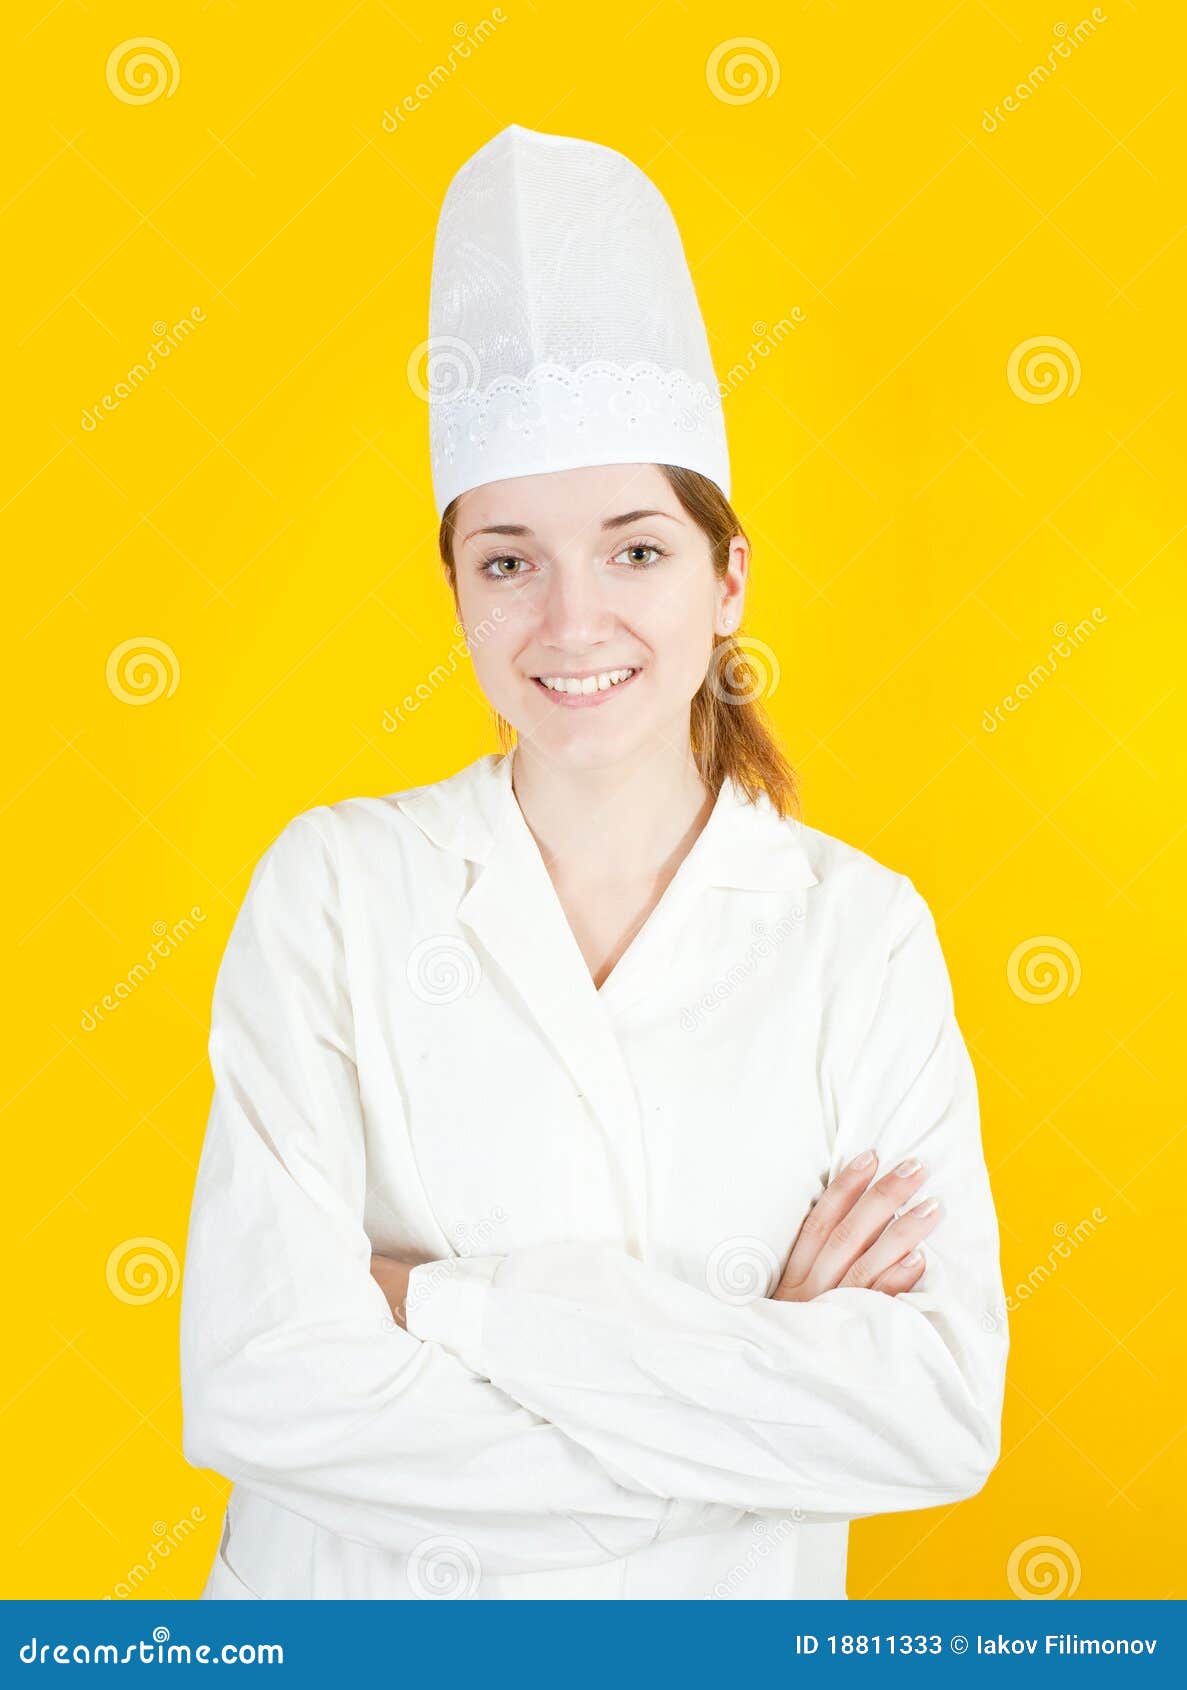 Female cook stock image. Image of cook, female, adult - 18811333